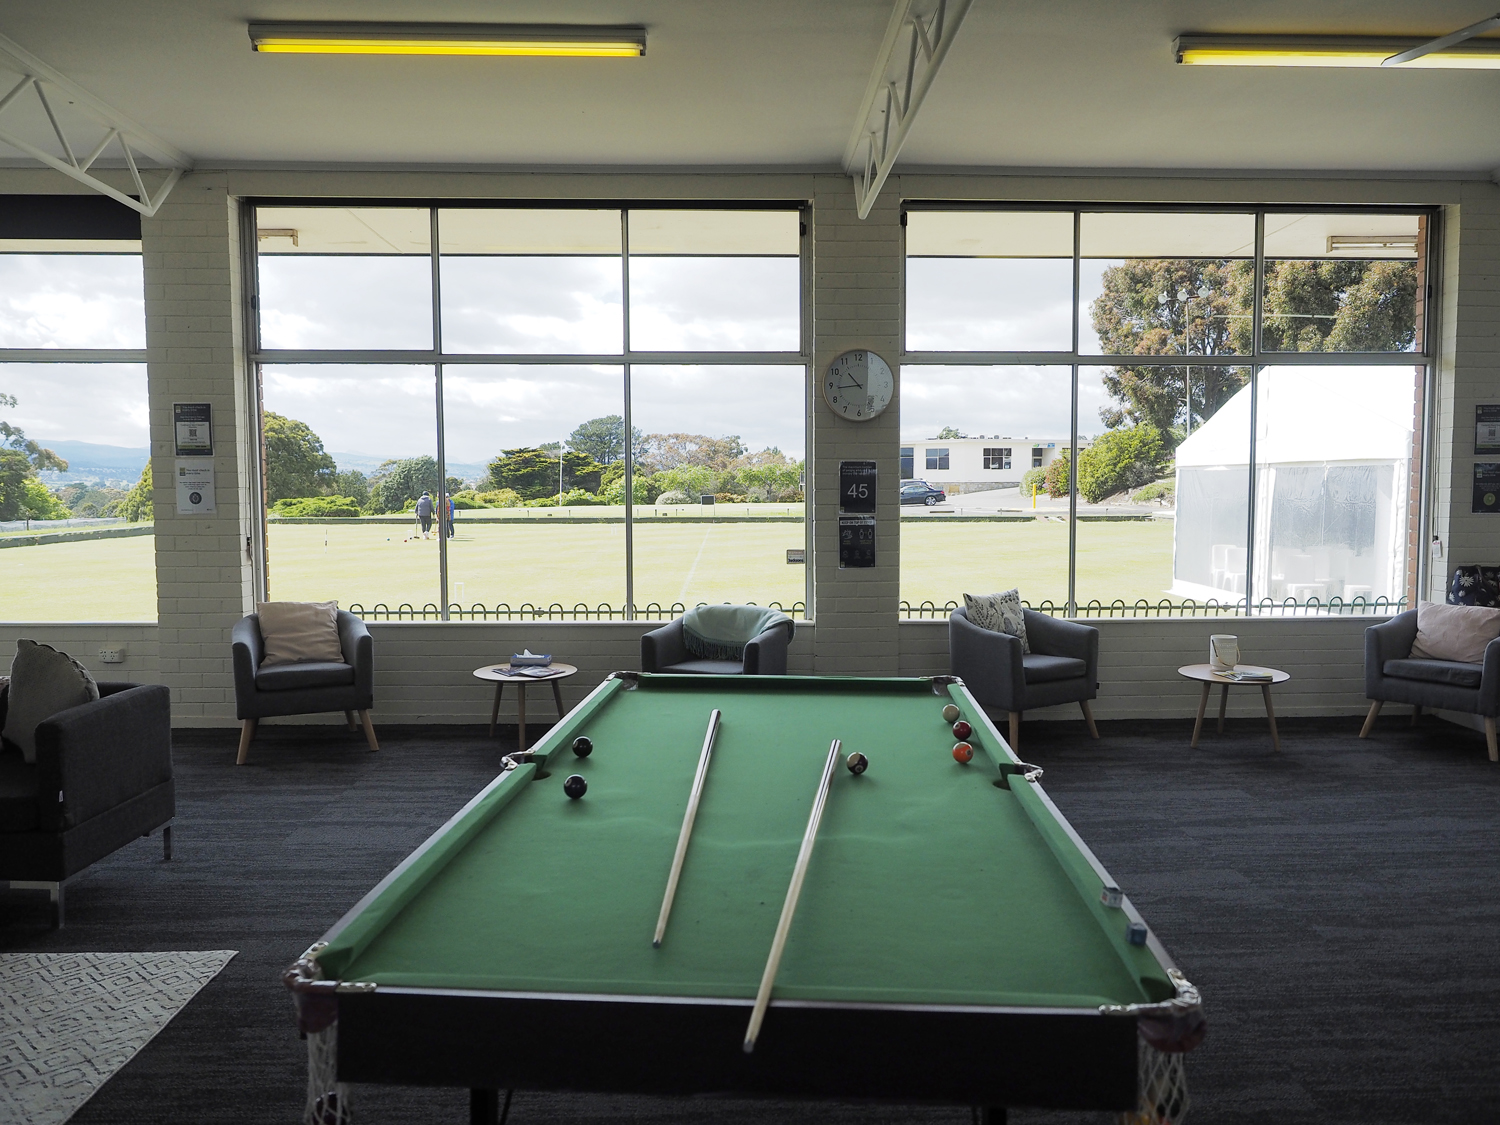 A pool table with cues in front of large windows looking out onto a lawn bowls green